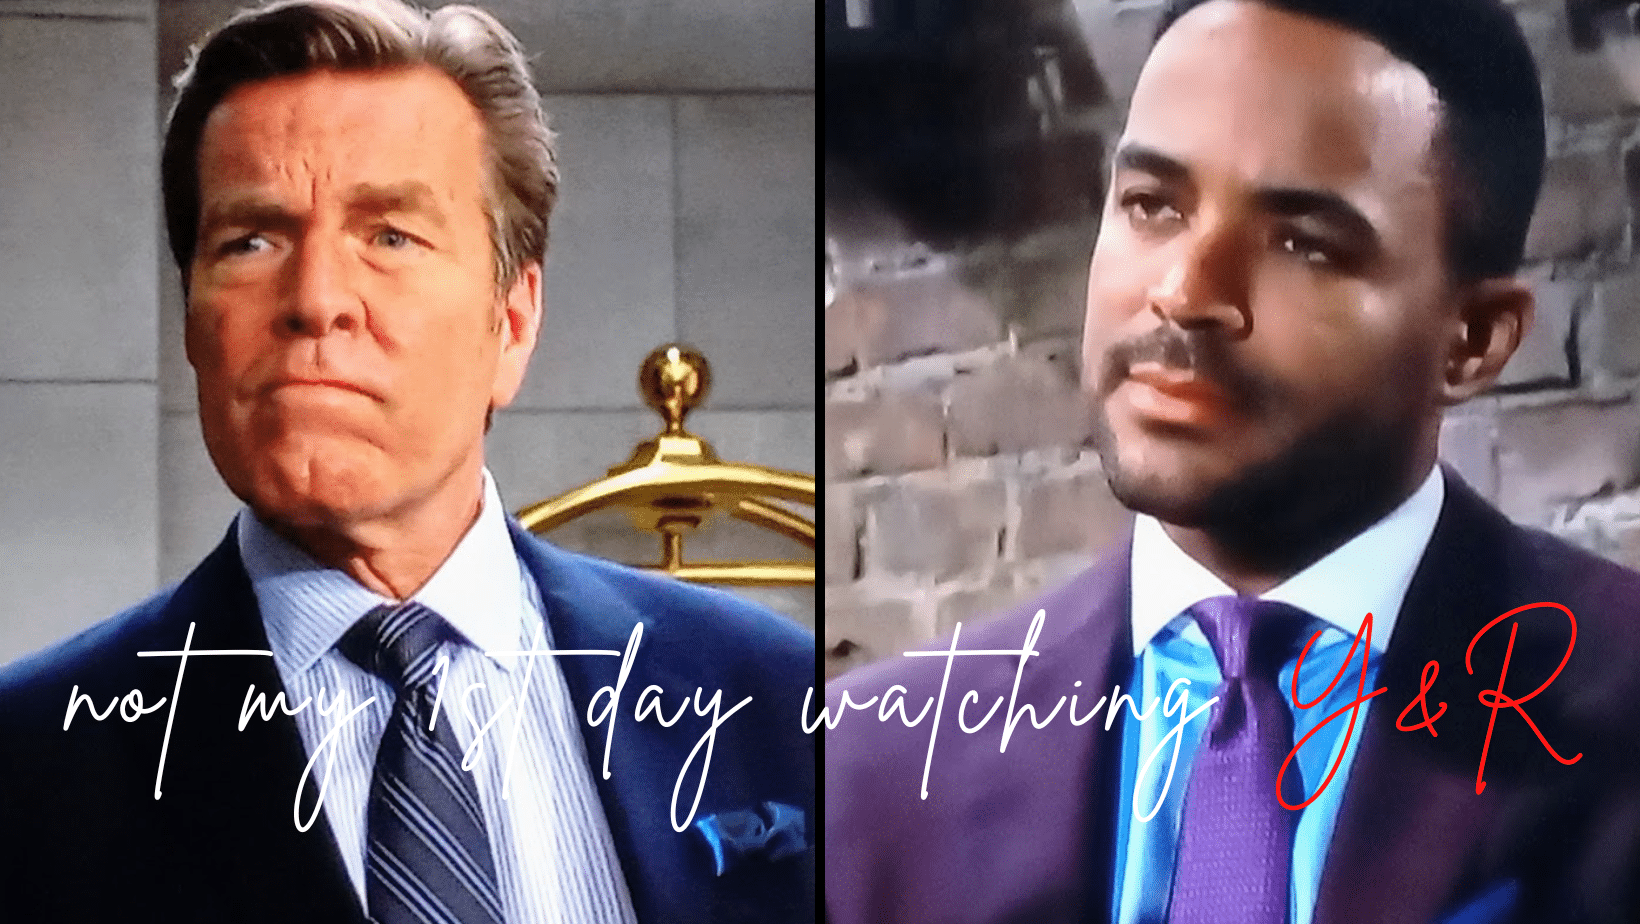 Y&R’s Nate Hastings & Jack Abbott, Could They Be More Dumb?!?